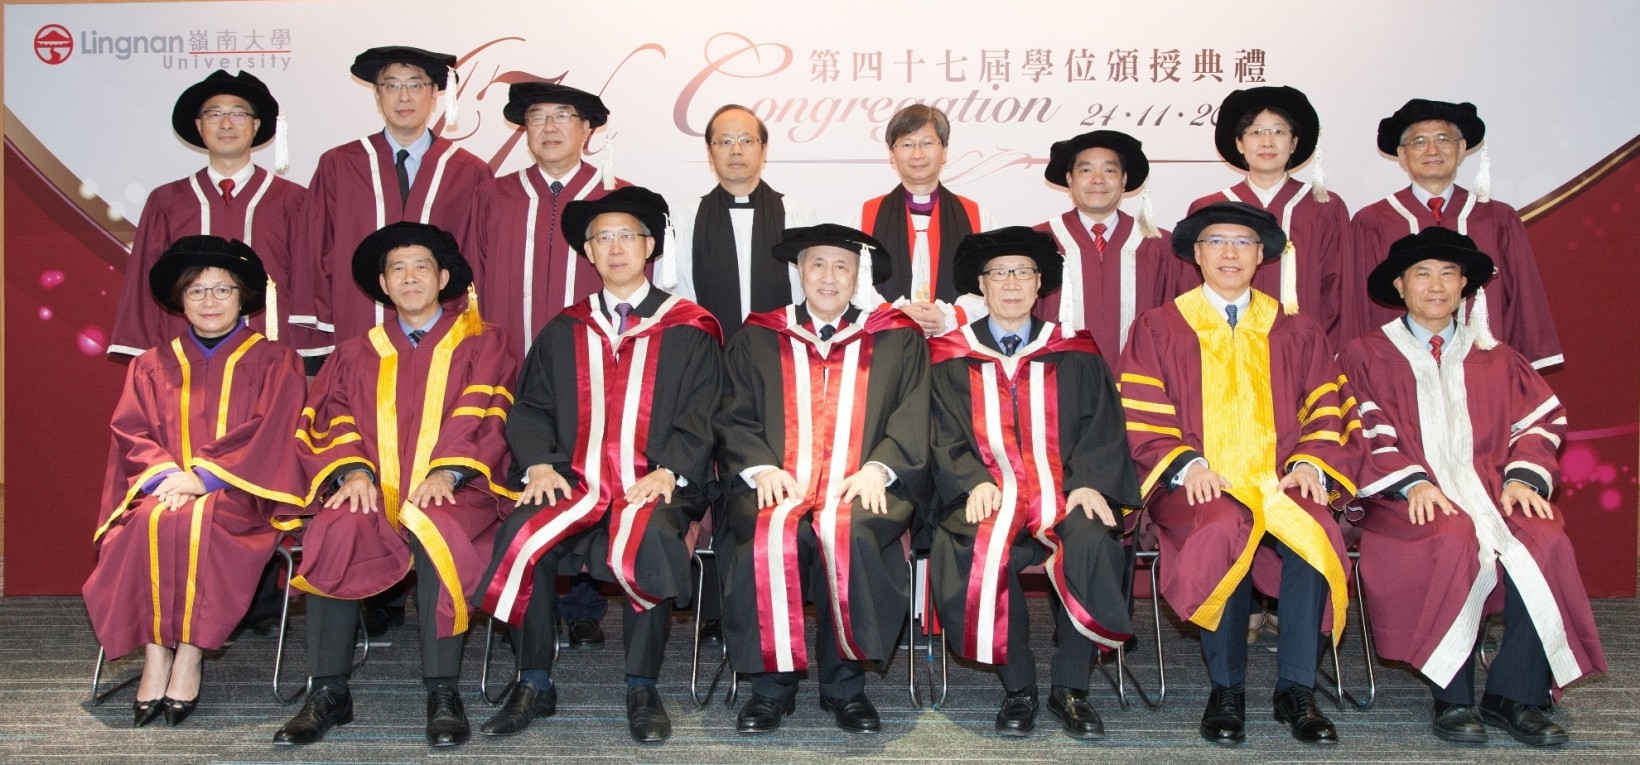 Honorary Doctorates Mr Warren Chan (3rd left, front row), Dr Anthony Francis Neoh (middle, front row) and Prof Yang Fujia (3rd right, front row) with representatives of Lingnan University including Mr Rex Auyeung Pak-kuen, Chairman of the University Counc